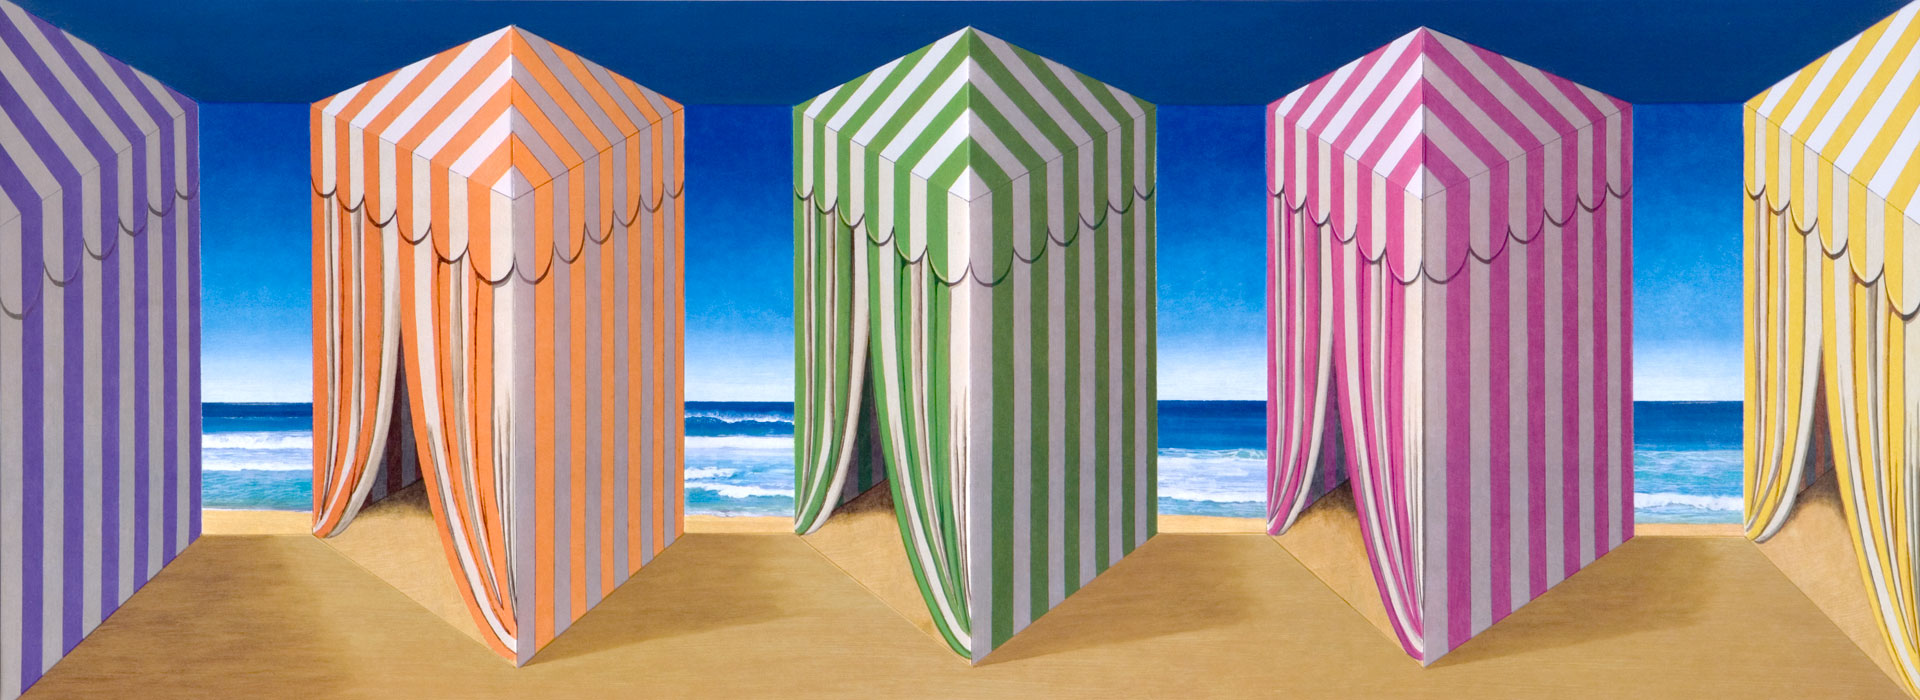 In Tents <p>2005 | Edition 45 | 44.5 x 96 x 15 cm / 17½ x 37¾ x 6 in</p>
